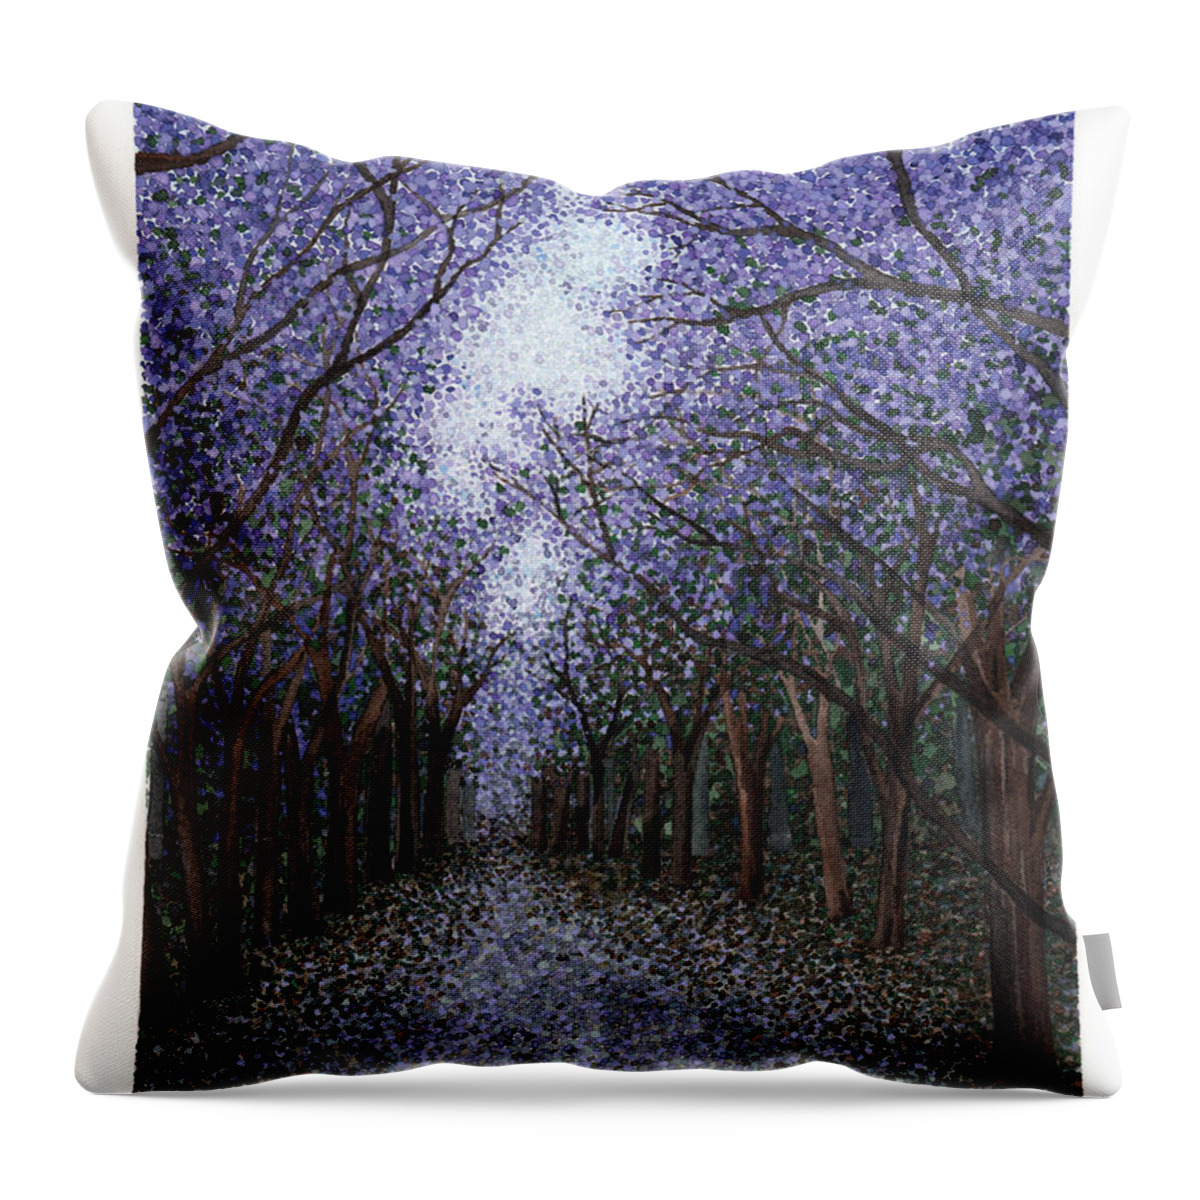 Sierra Madre Throw Pillow featuring the painting Sierra Madre Jacarandas by Hilda Wagner